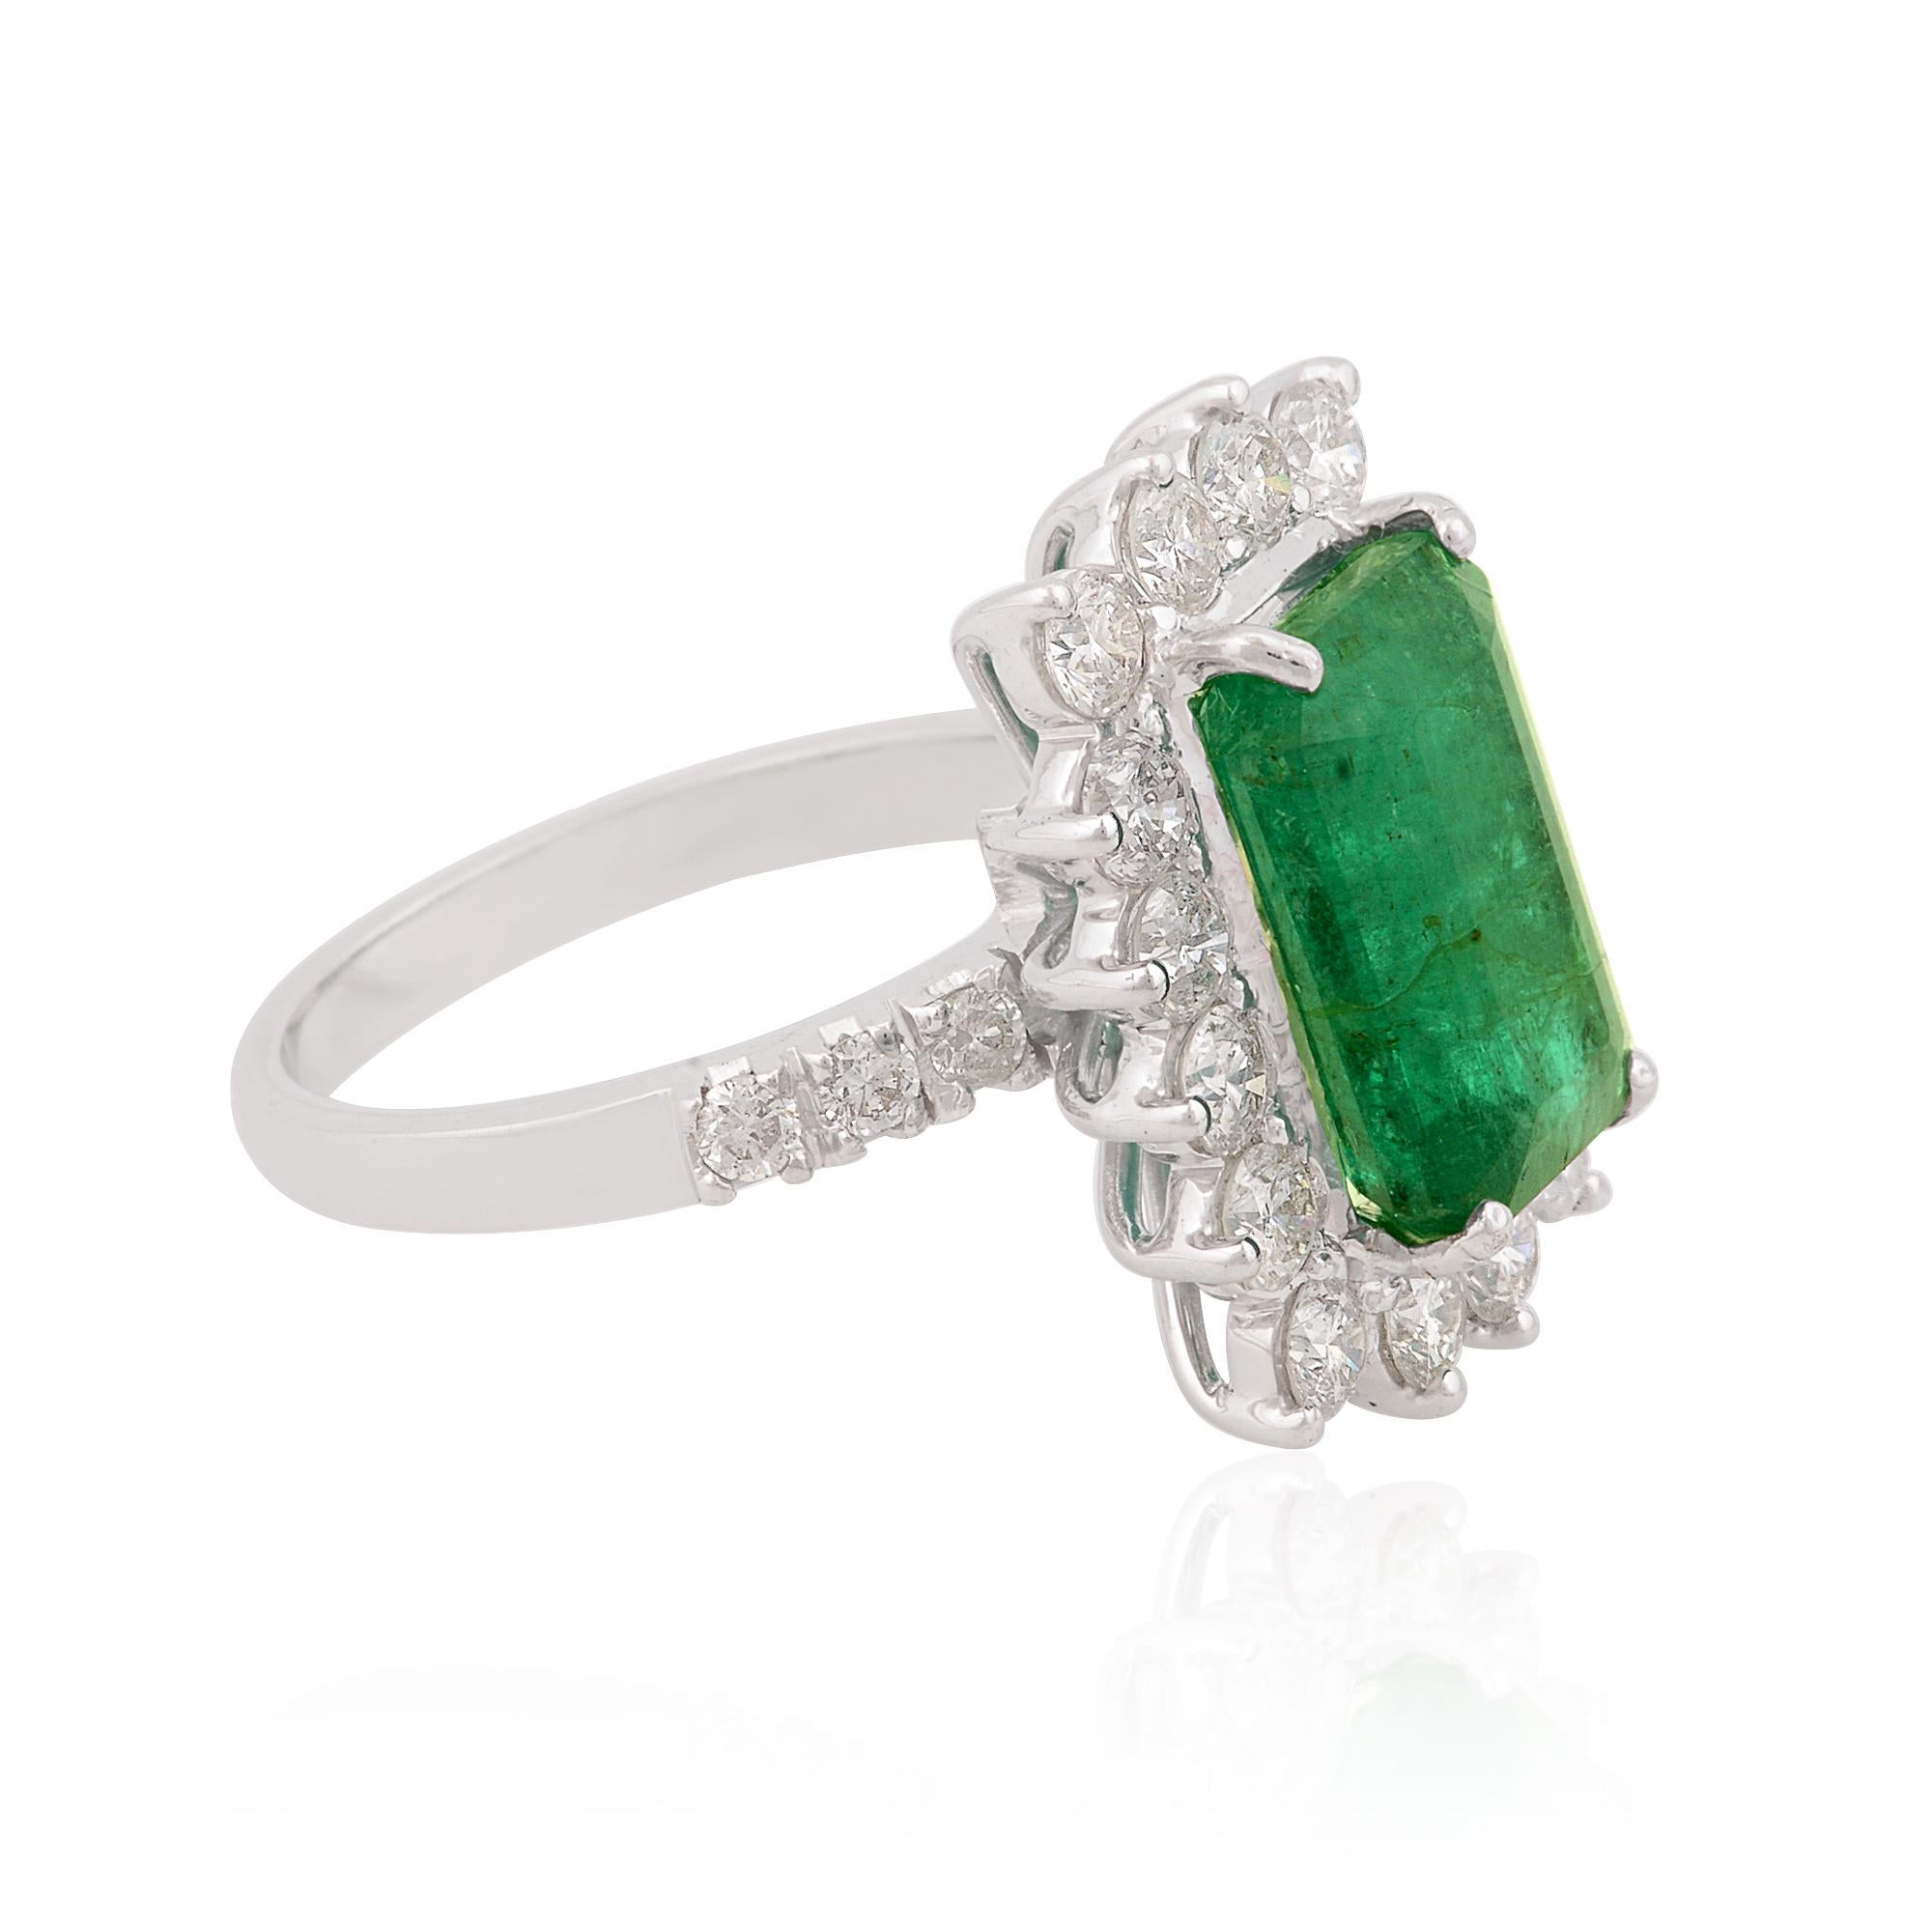 For Sale:  Natural Emerald Gemstone Cocktail Ring Diamond Solid 18k White Gold Fine Jewelry 2